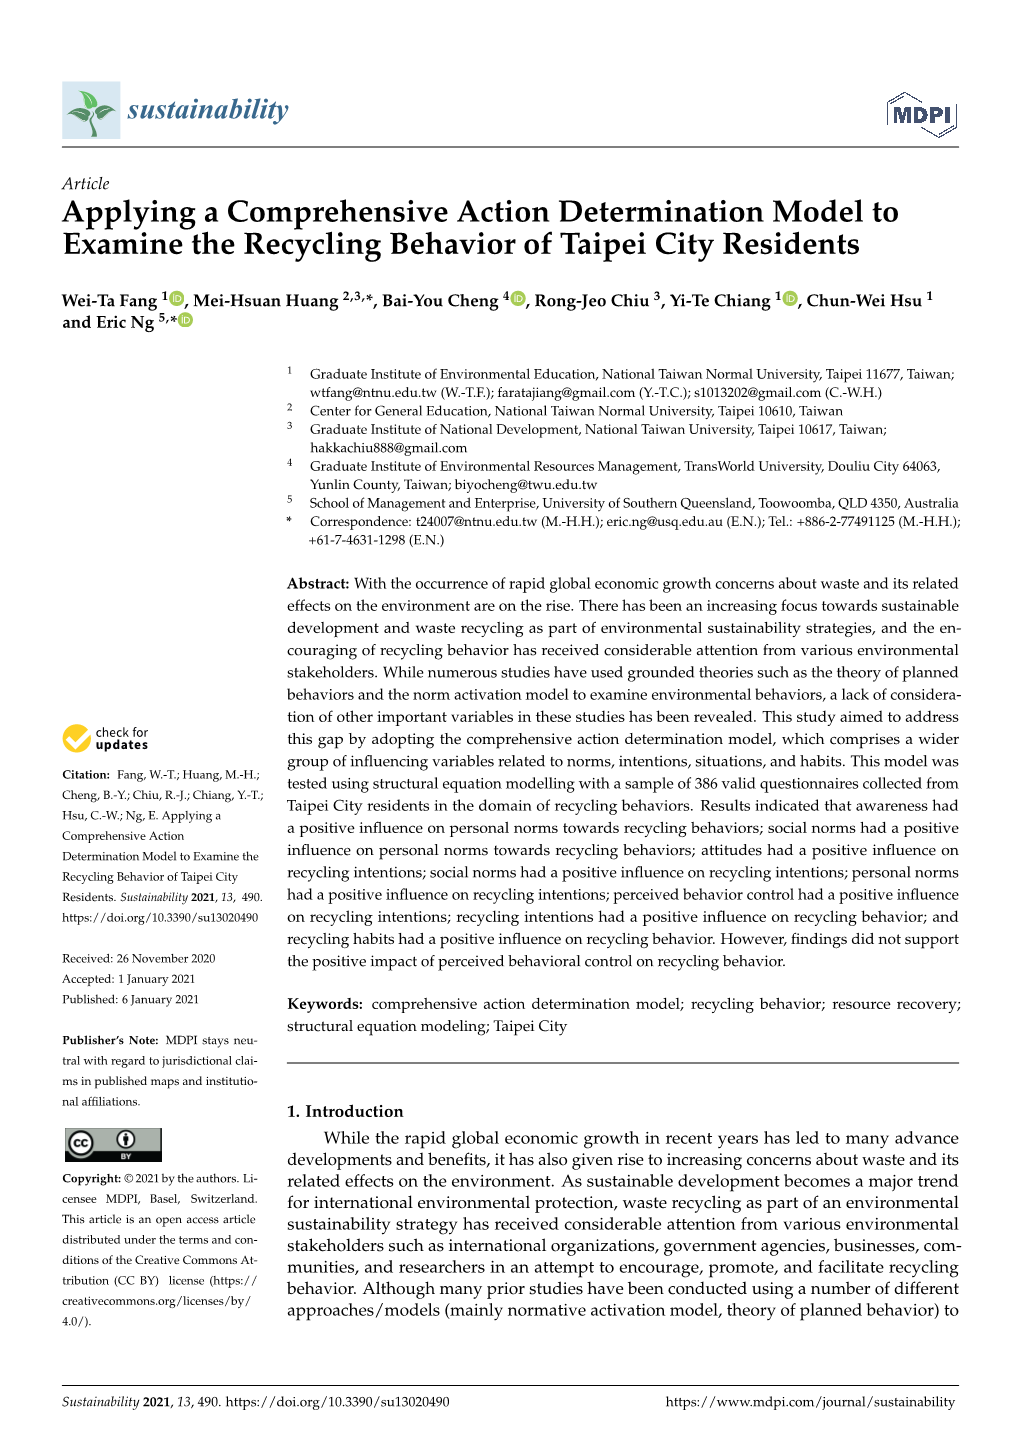 Applying a Comprehensive Action Determination Model to Examine the Recycling Behavior of Taipei City Residents